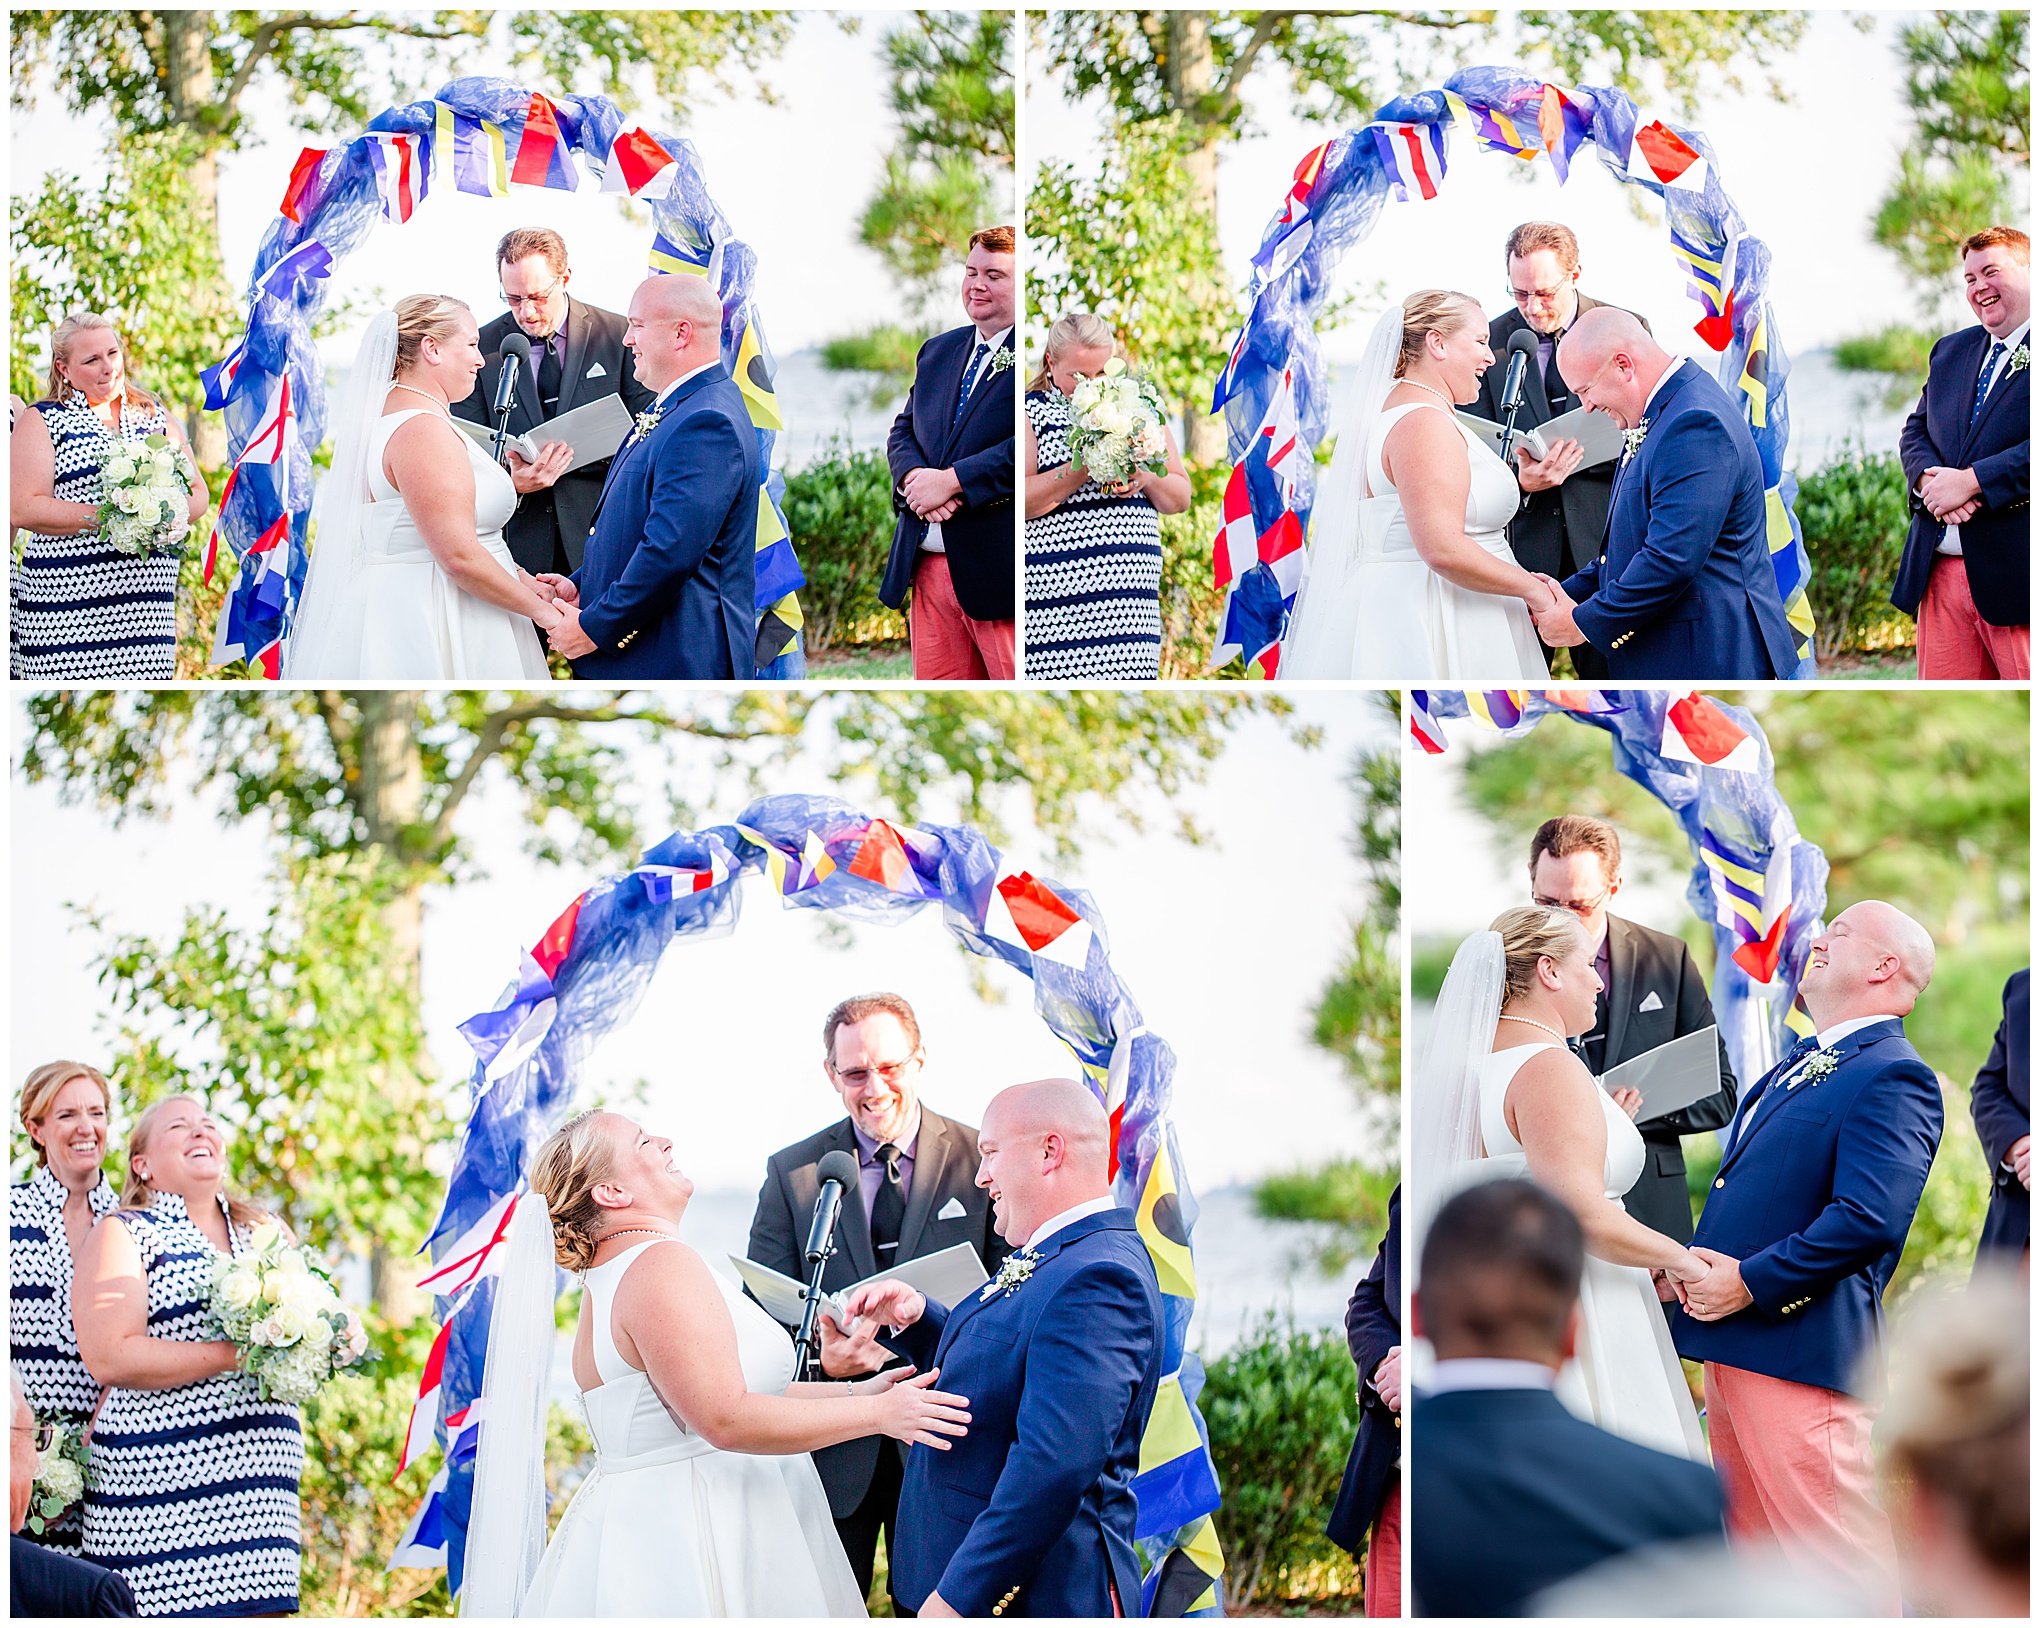 Nantucket inspired Gibson Island Club wedding, nautical wedding inspiration, Annapolitan wedding inspiration, Gibson Island Club wedding photography, Gibson Island Club wedding photographer, Annapolis wedding photographer, Baltimore wedding photographer, Maryland wedding photographer, nautical aesthetic, Annapolis wedding inspiration, Rachel E.H. Photography, bride and groom laughing, bride and groom laughing at alter, bride and groom saying vows